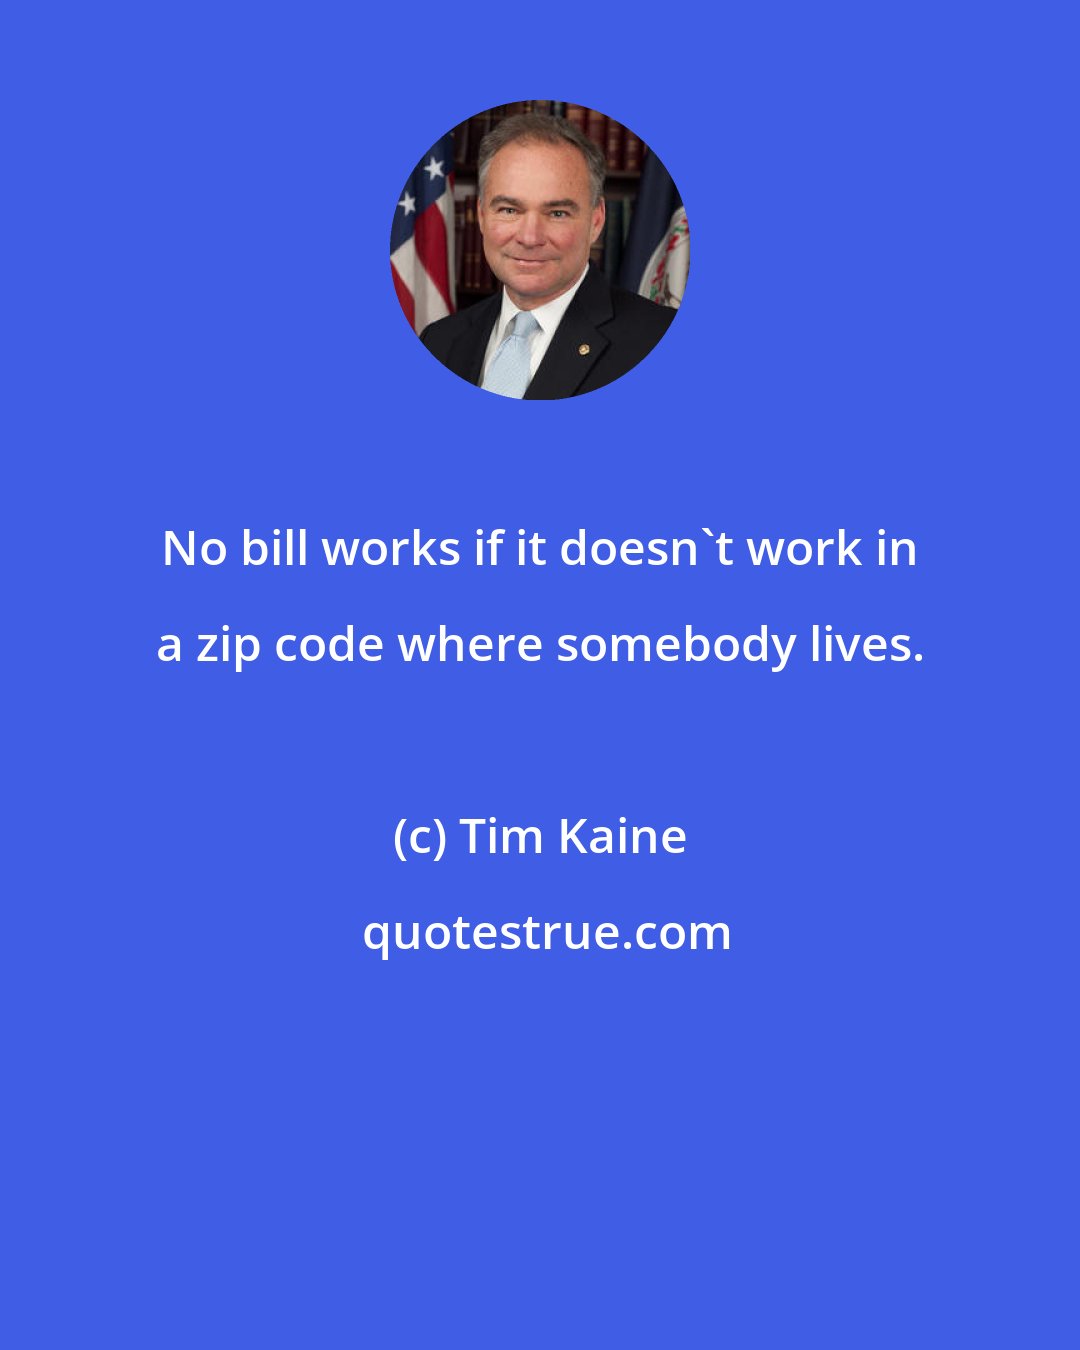 Tim Kaine: No bill works if it doesn't work in a zip code where somebody lives.